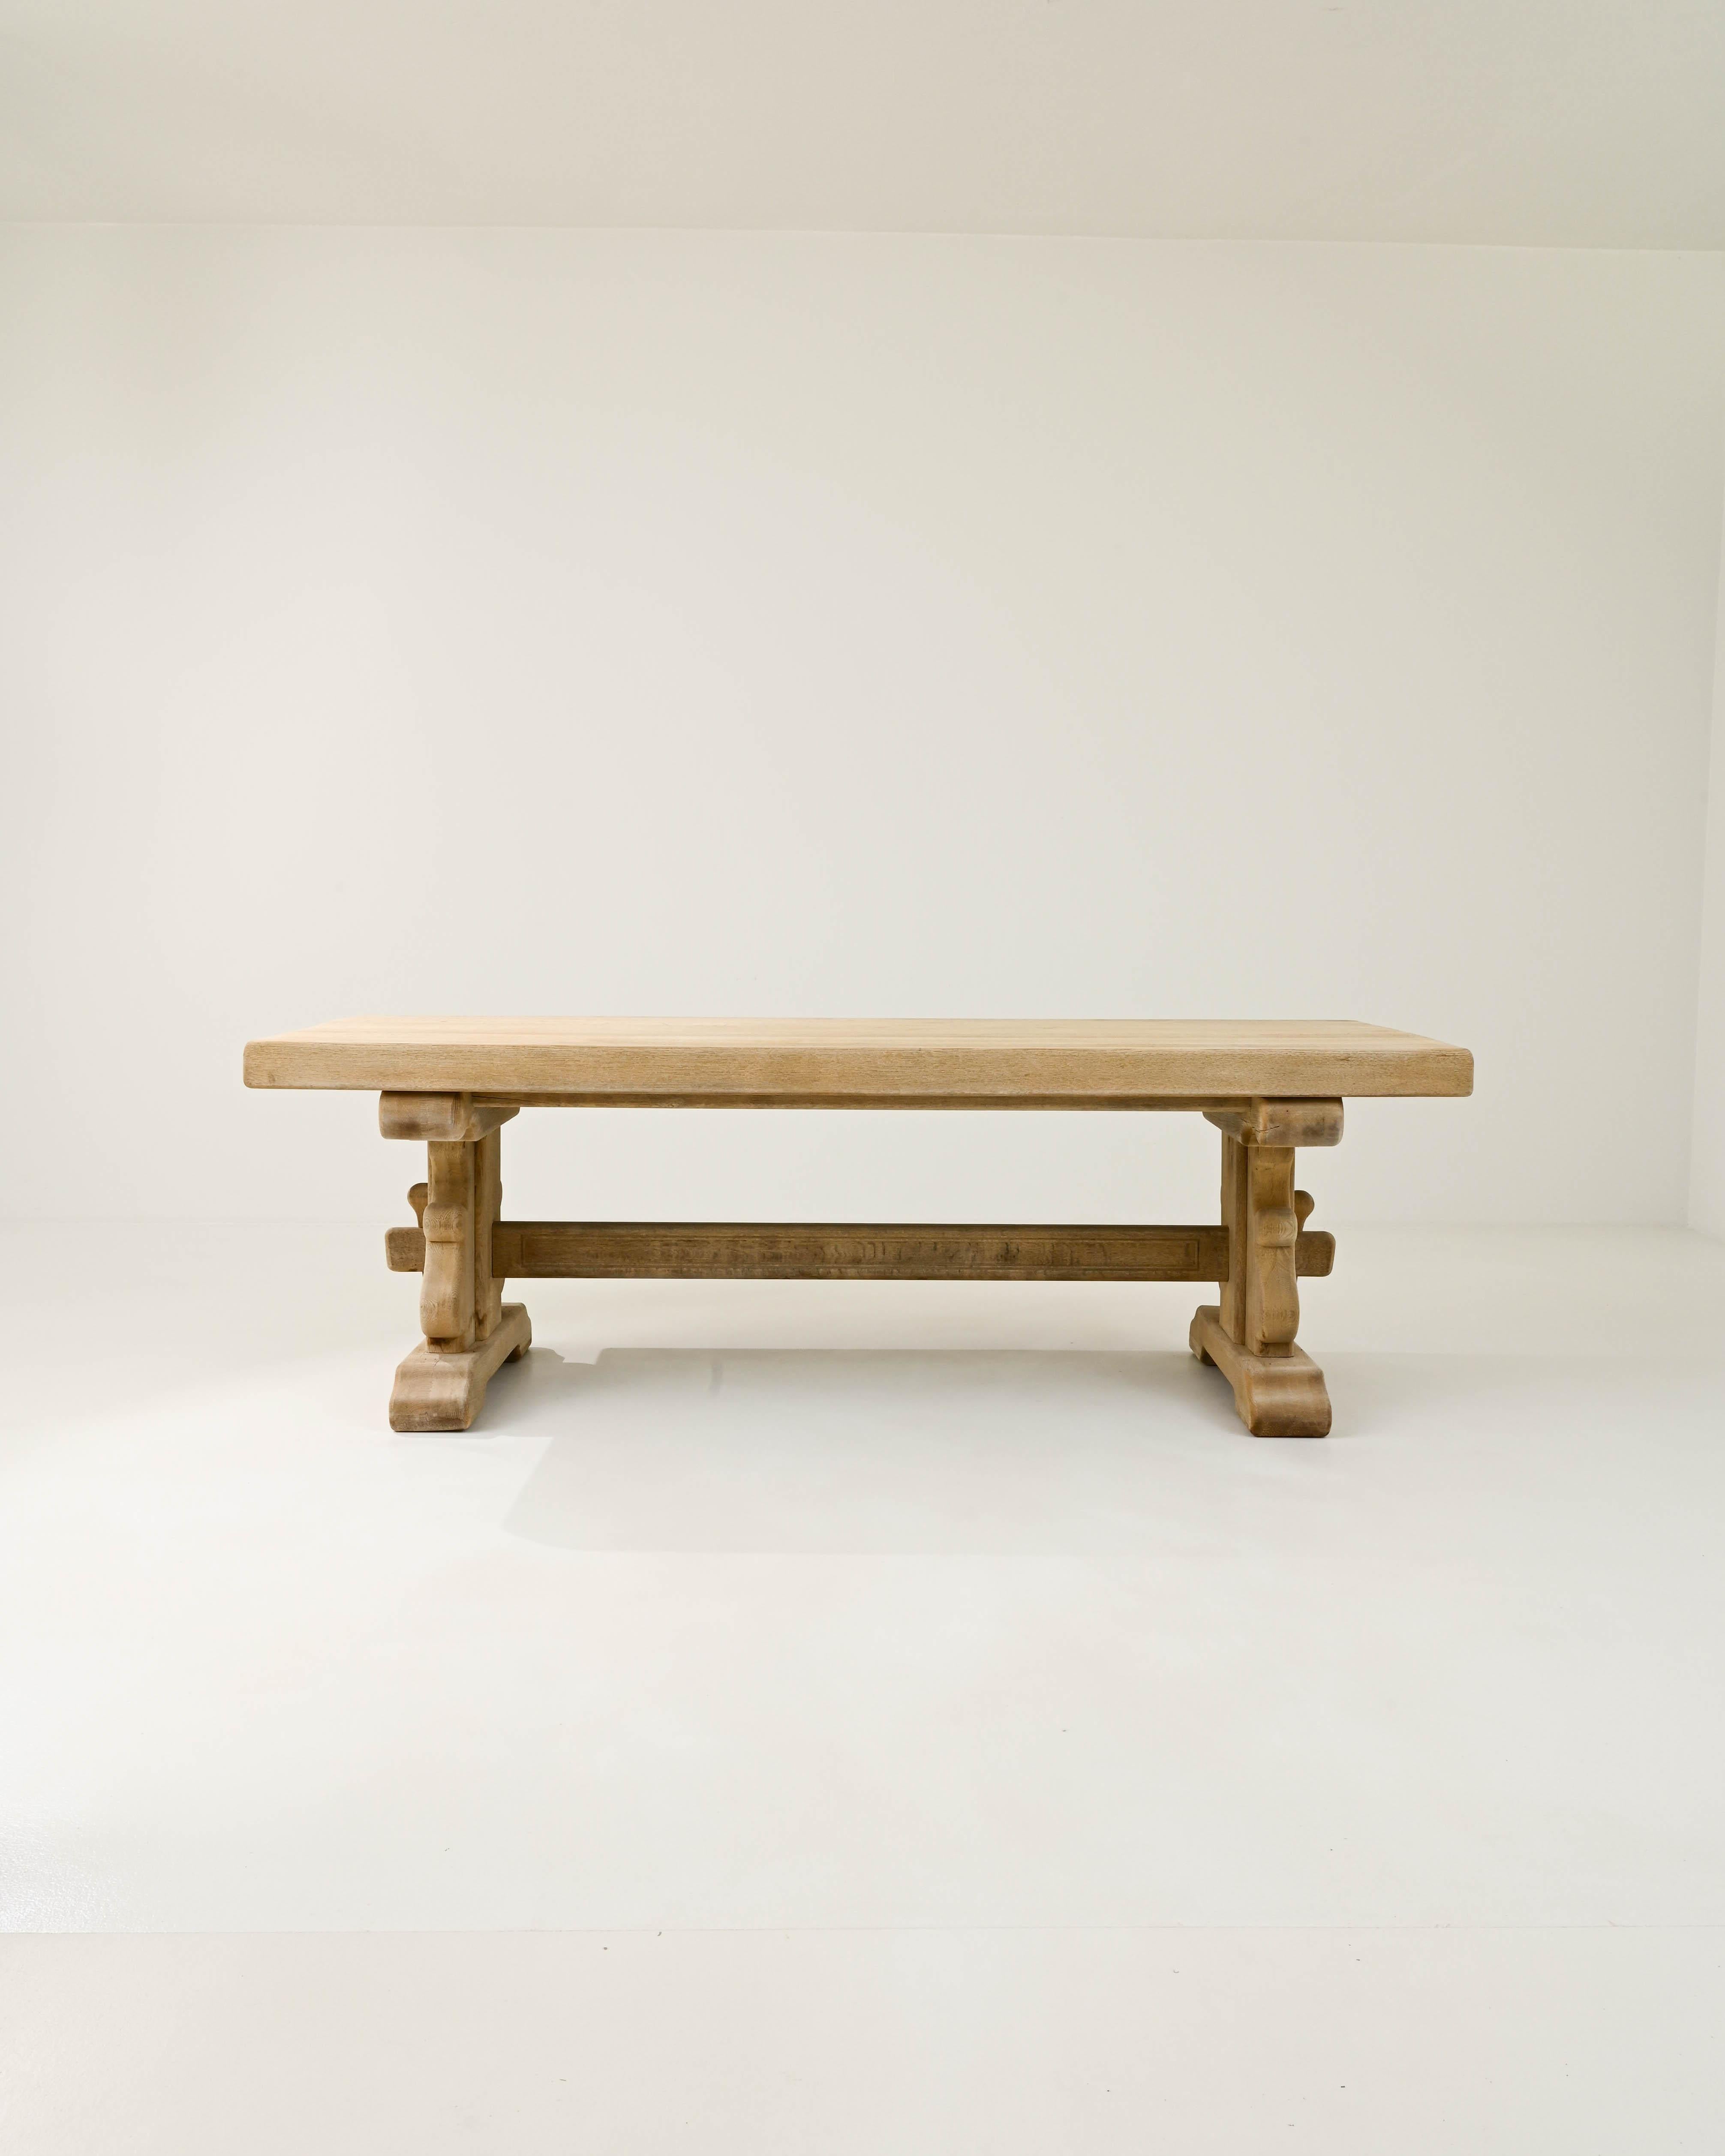 This vintage oak dining table offers a traditional design, beautifully crafted. Hand-built in Belgium in the 20th century, the rectangular table top sits atop a trestle base. The simple country silhouette is subtly embellished by the softly carved